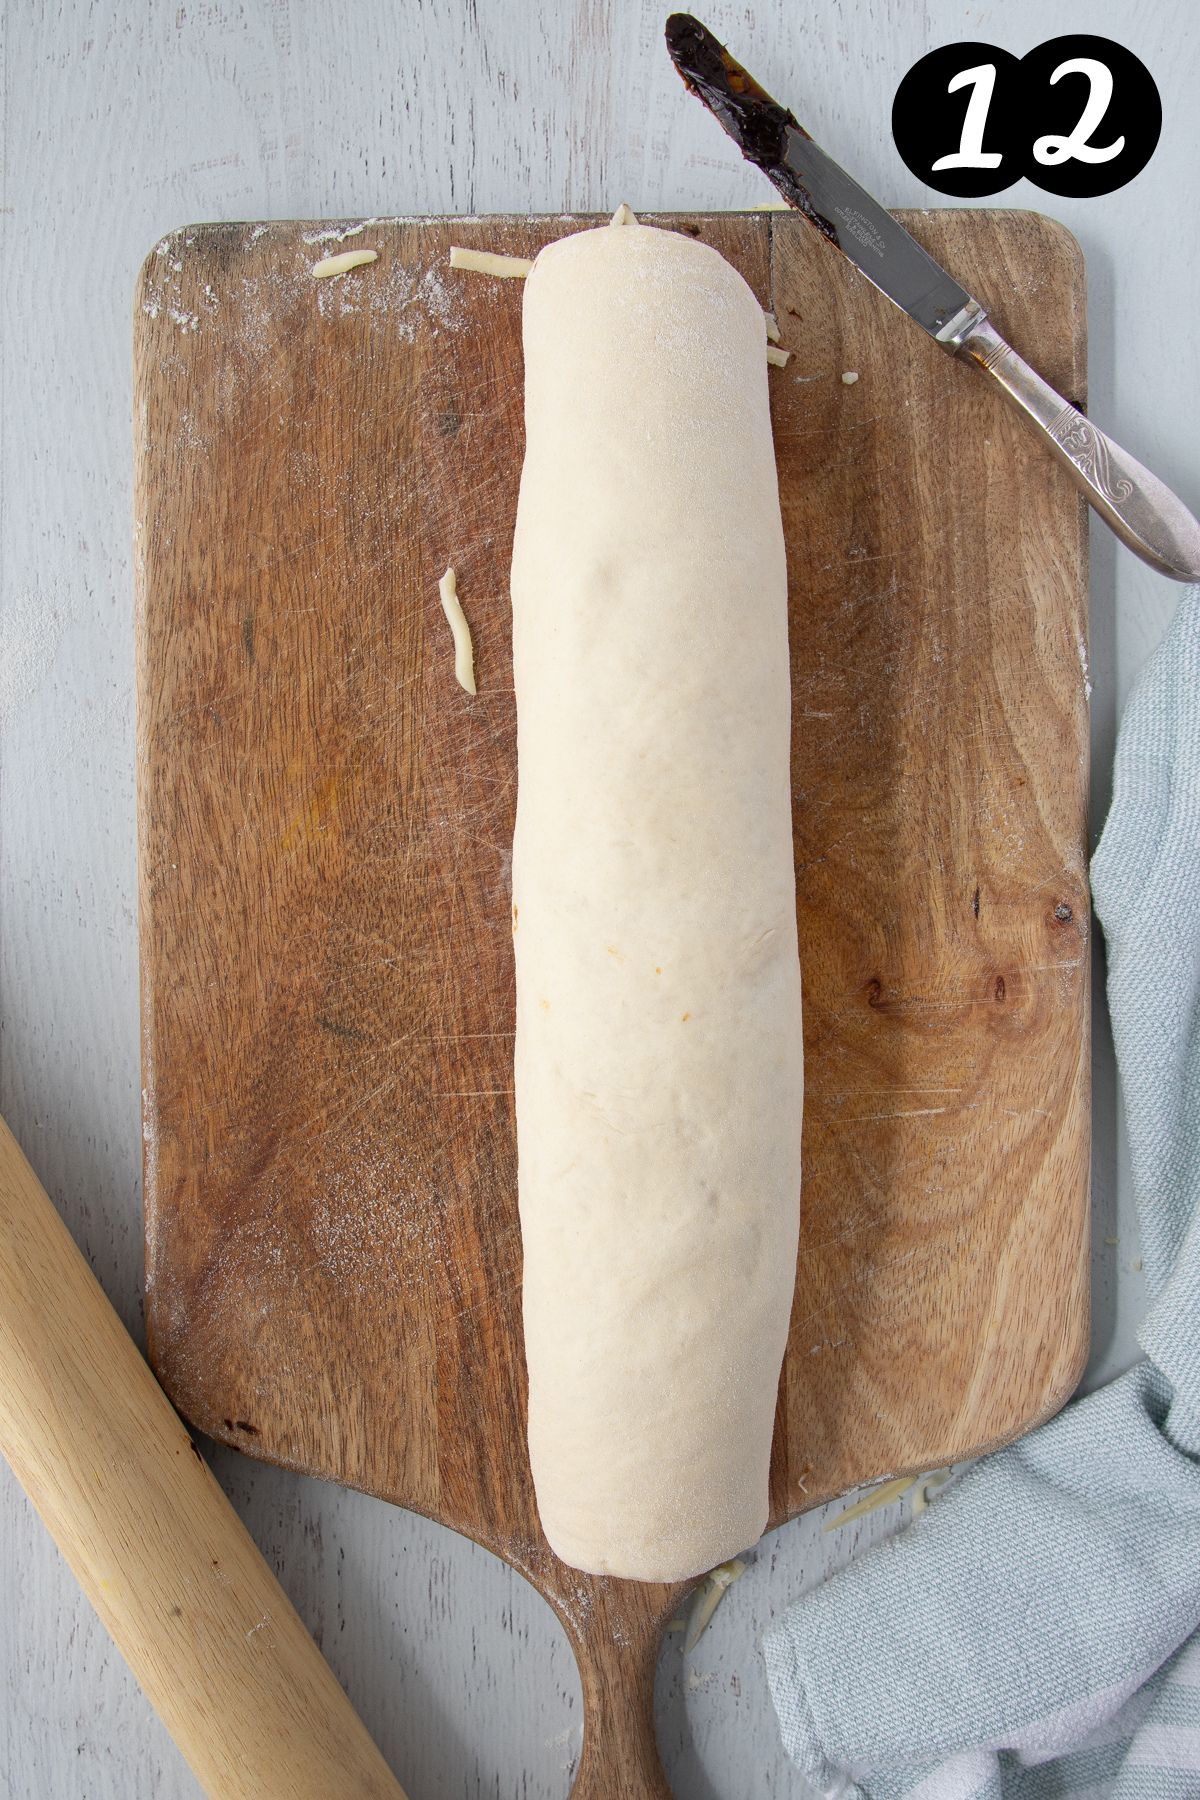 rolled dough on a wooden board